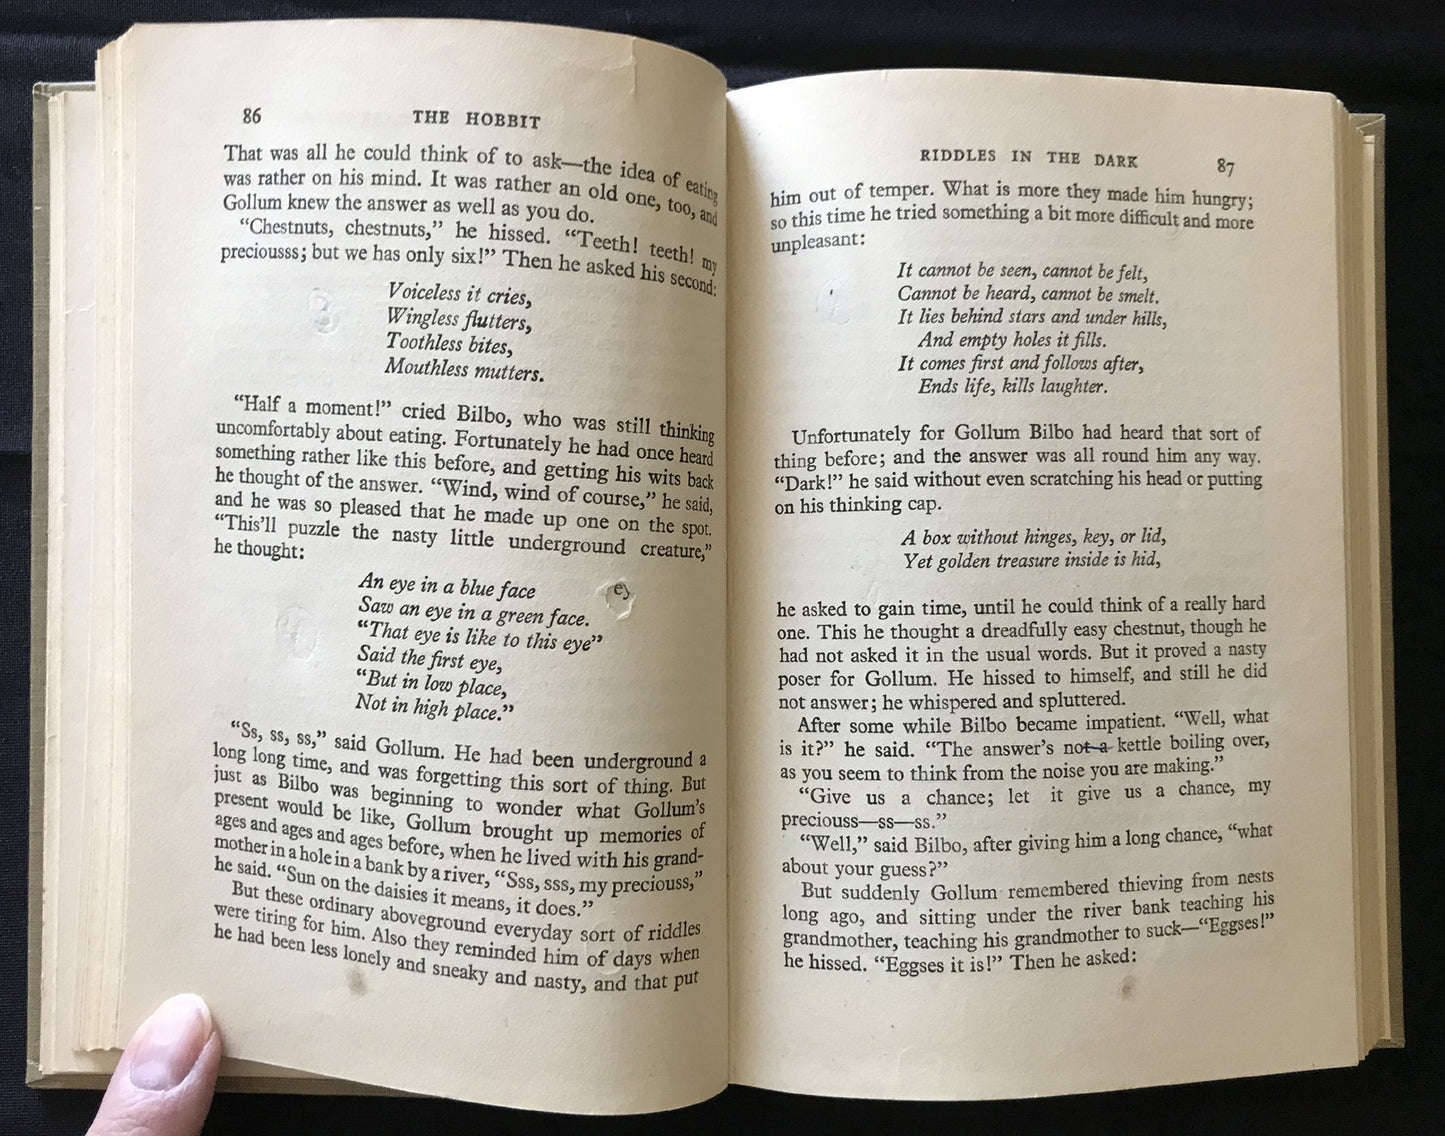 The Hobbit - pages